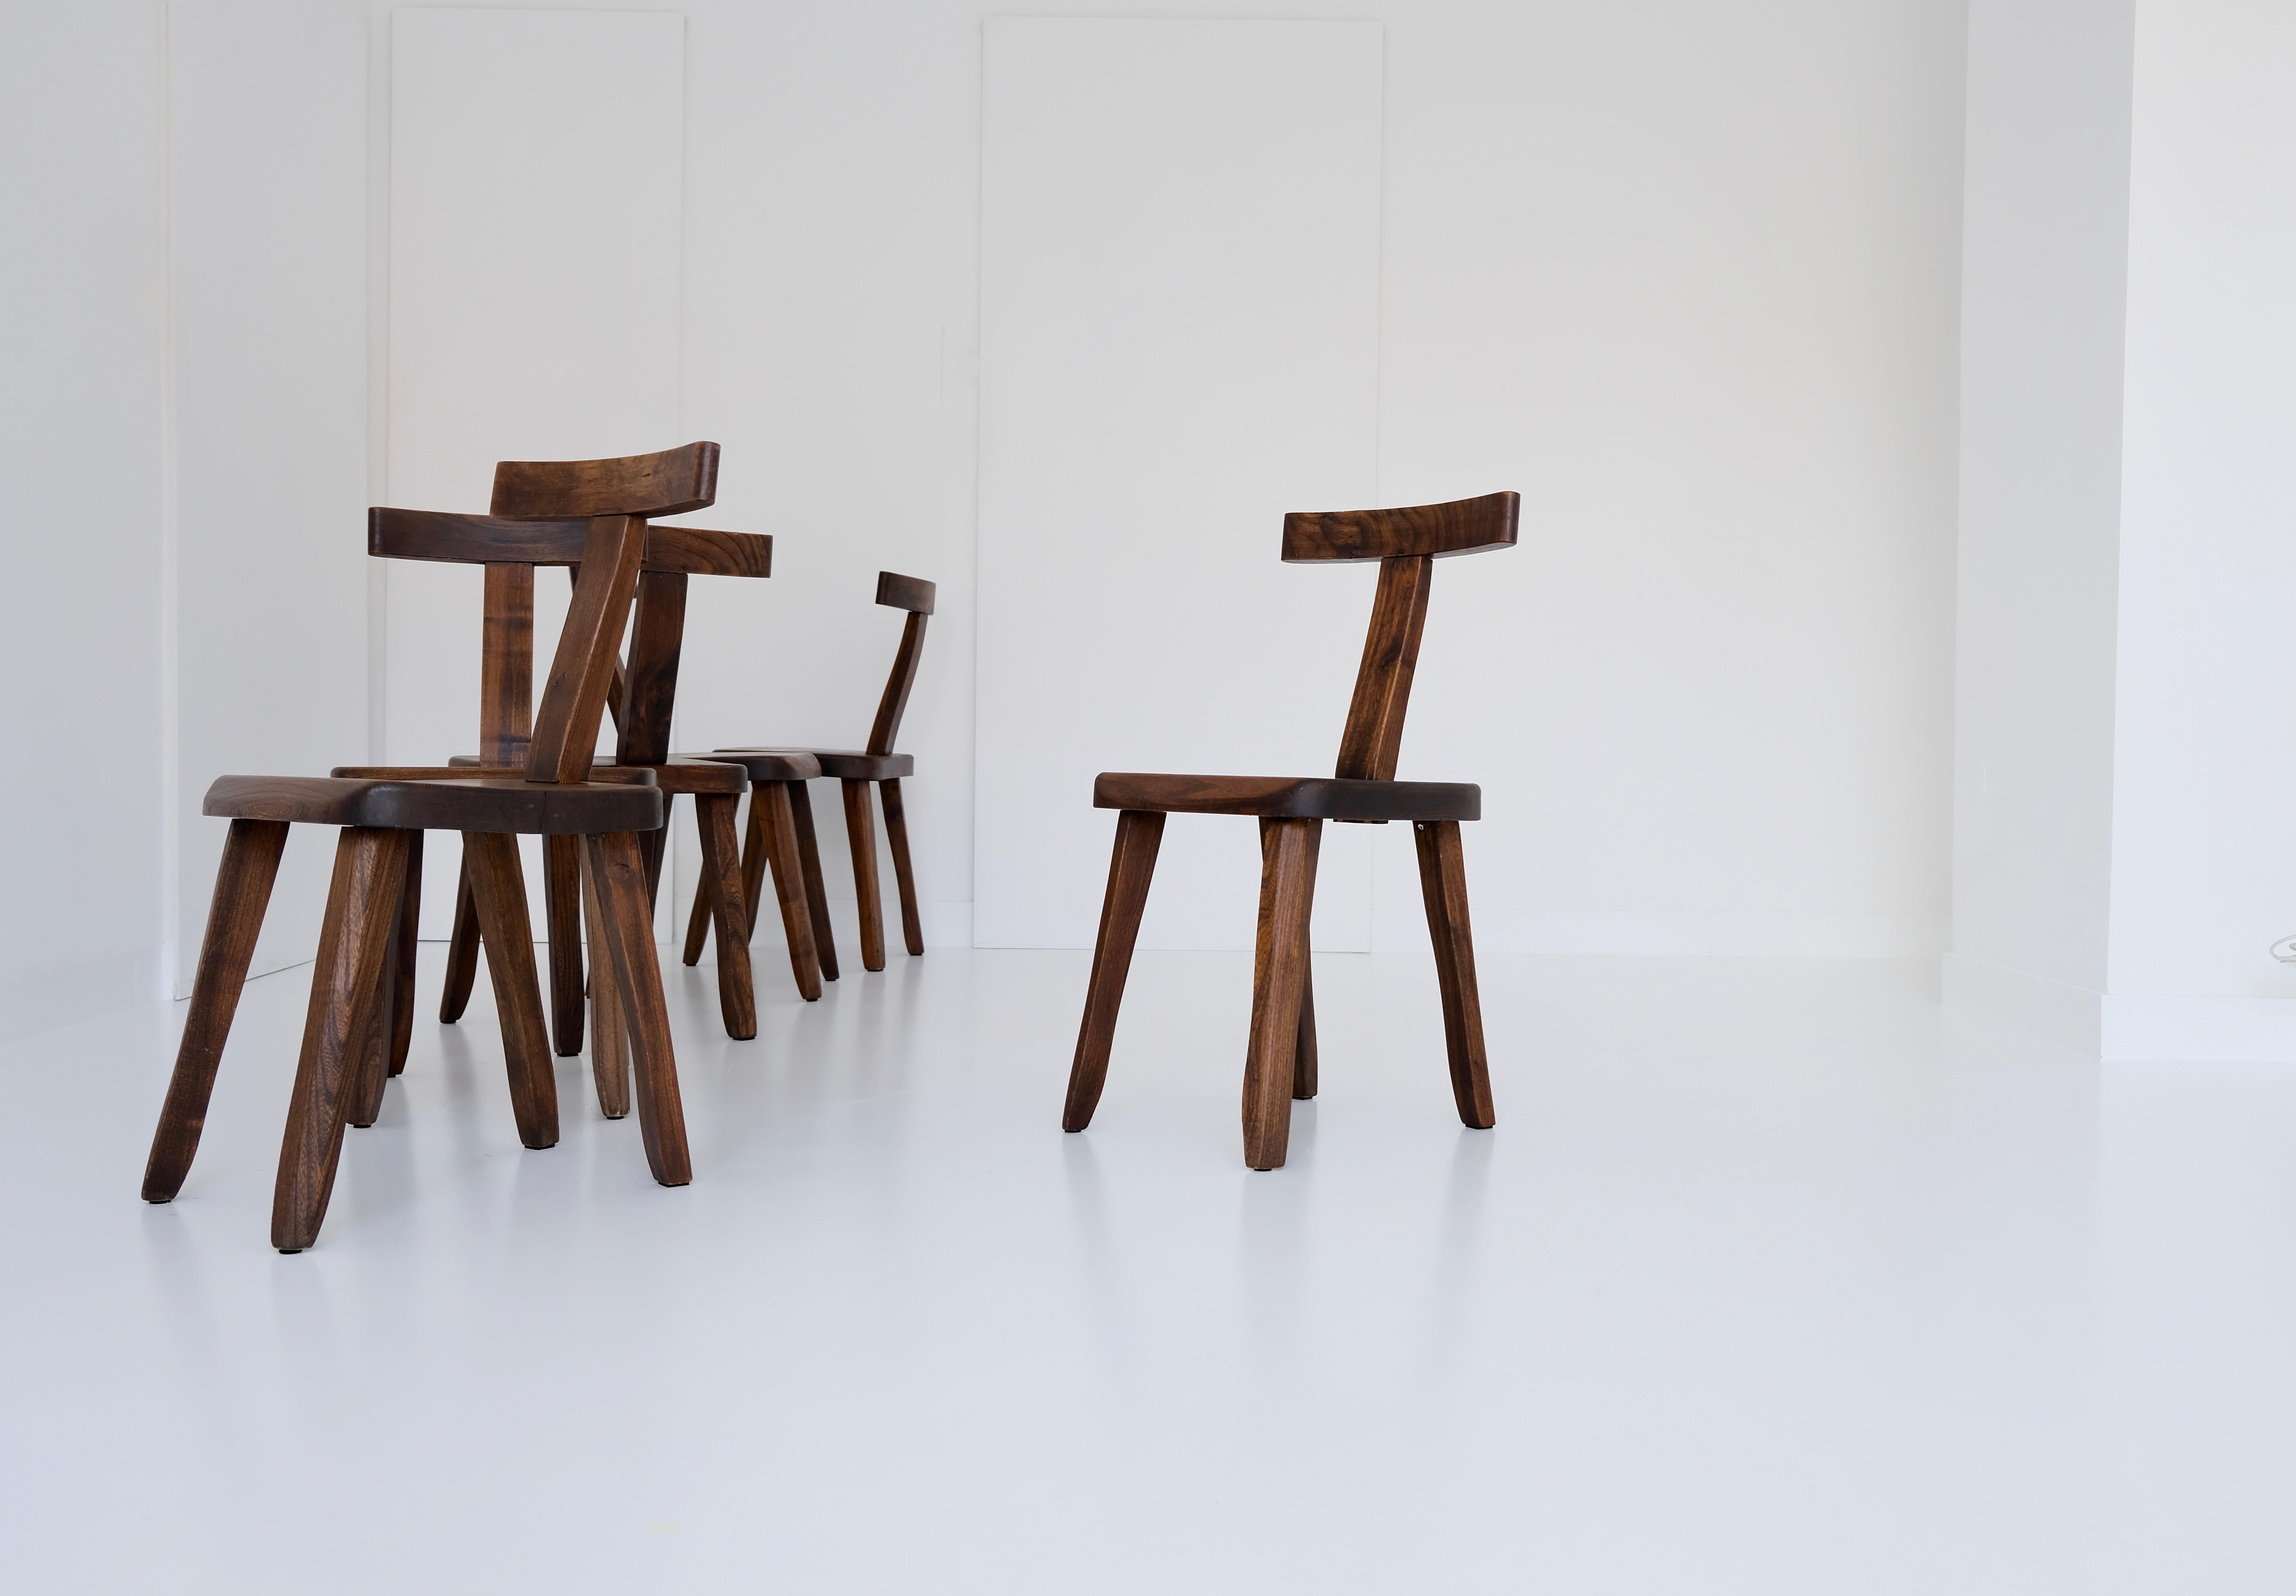 Set of 6 Brutalistic, Minimalistic Dining or Side Chairs Made of Elm Wood 1